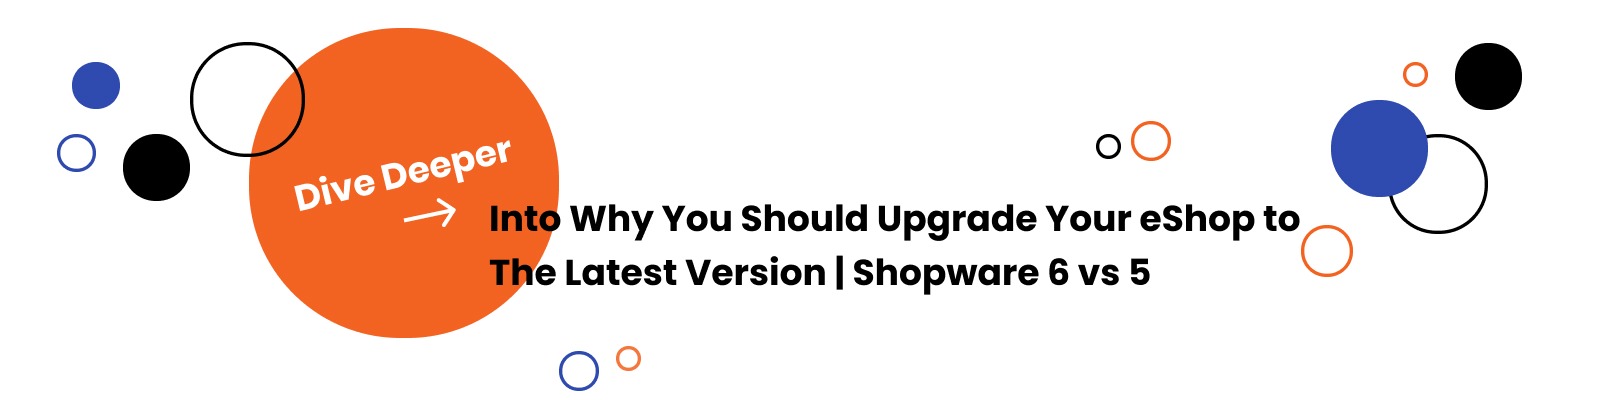 Why You Should Upgrade Your eShop to The Latest Version | Shopware 6 vs 5